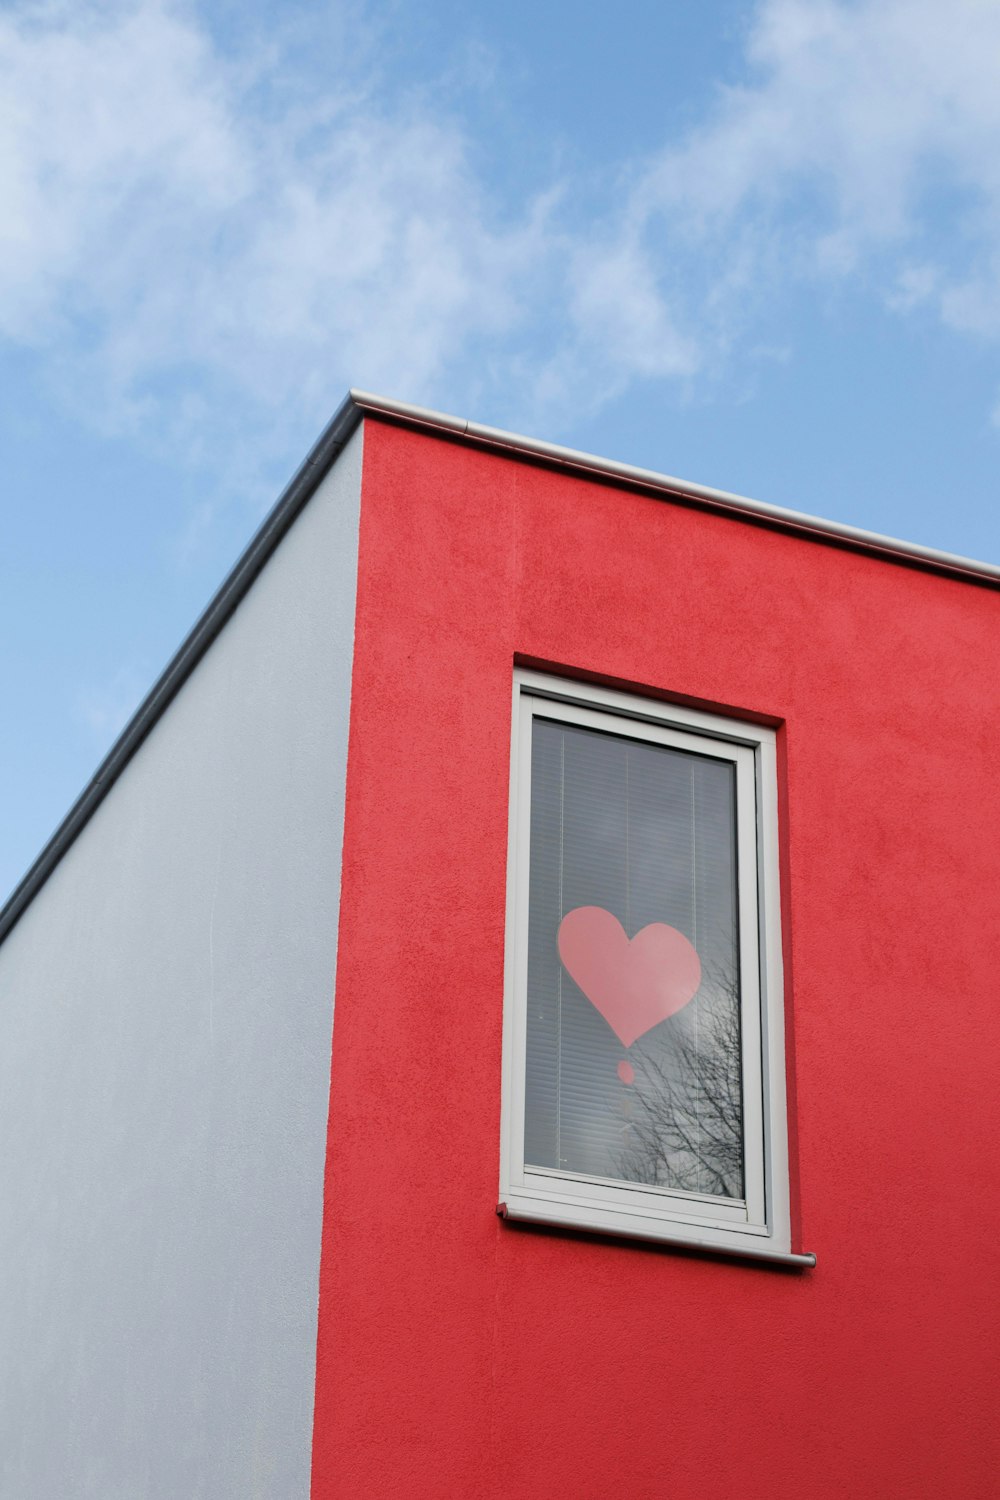 a red and gray building with a window with a heart drawn on it